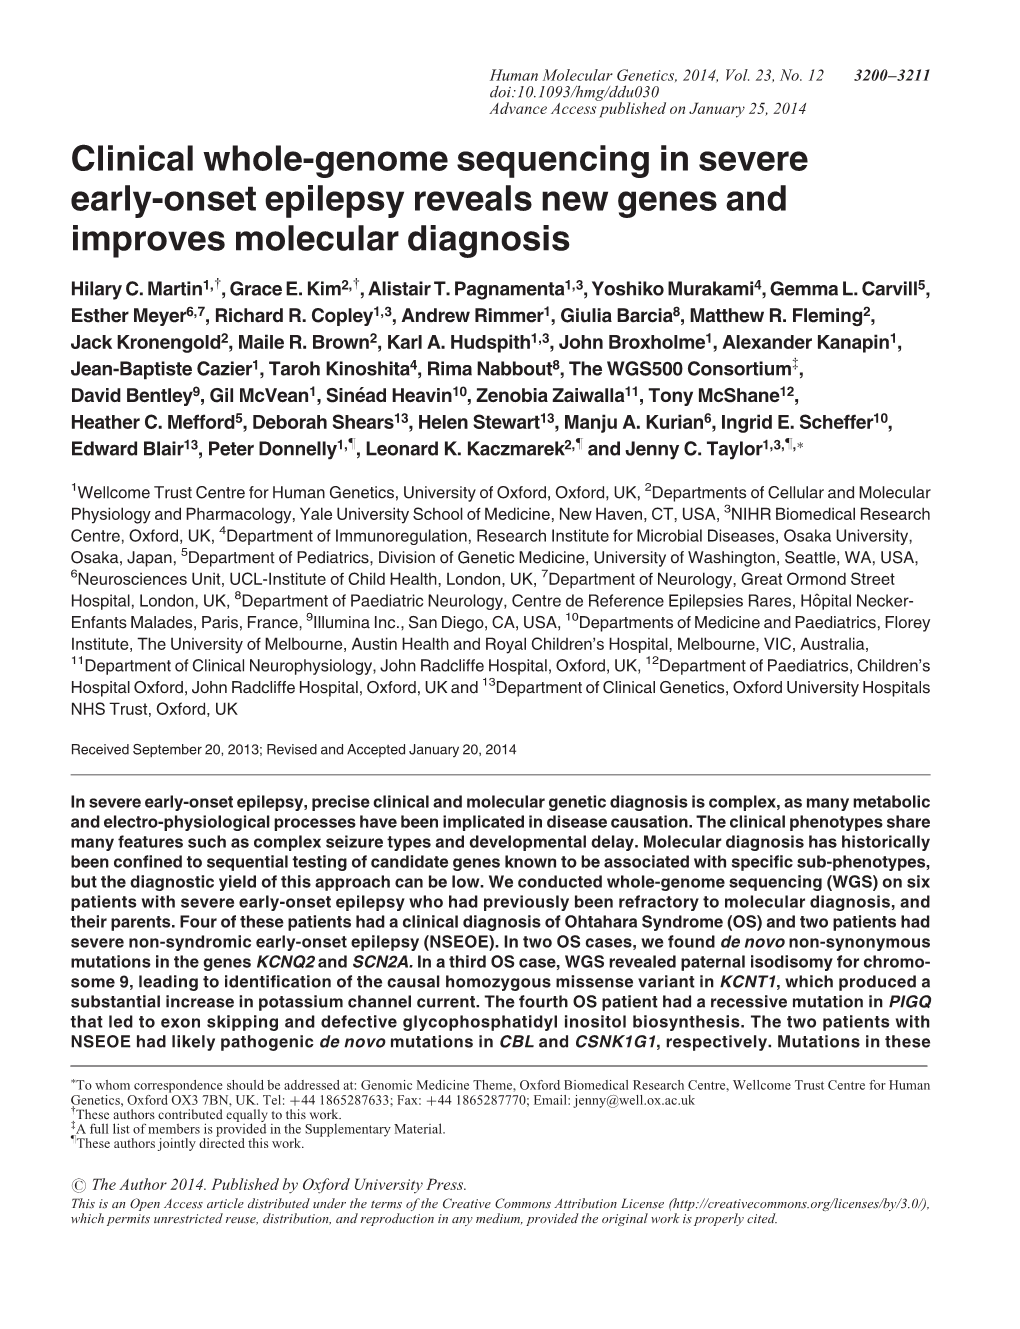 Clinical Whole-Genome Sequencing in Severe Early-Onset Epilepsy Reveals New Genes and Improves Molecular Diagnosis